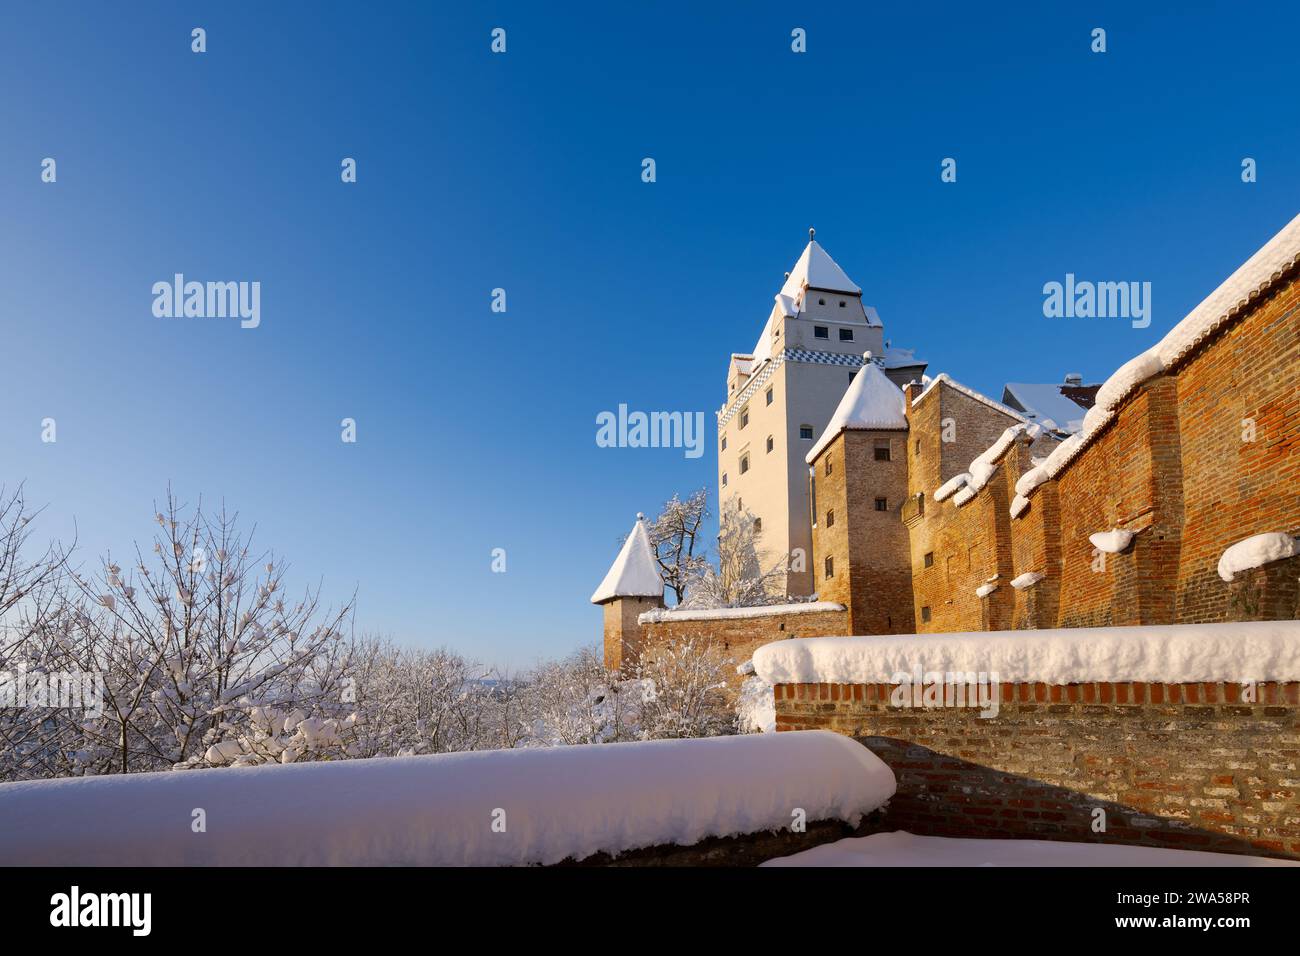 The outside of Castle Trausnitz in Landshut, Lower Bavaria with snow covered walls and roofs in winter on sunny day Stock Photo